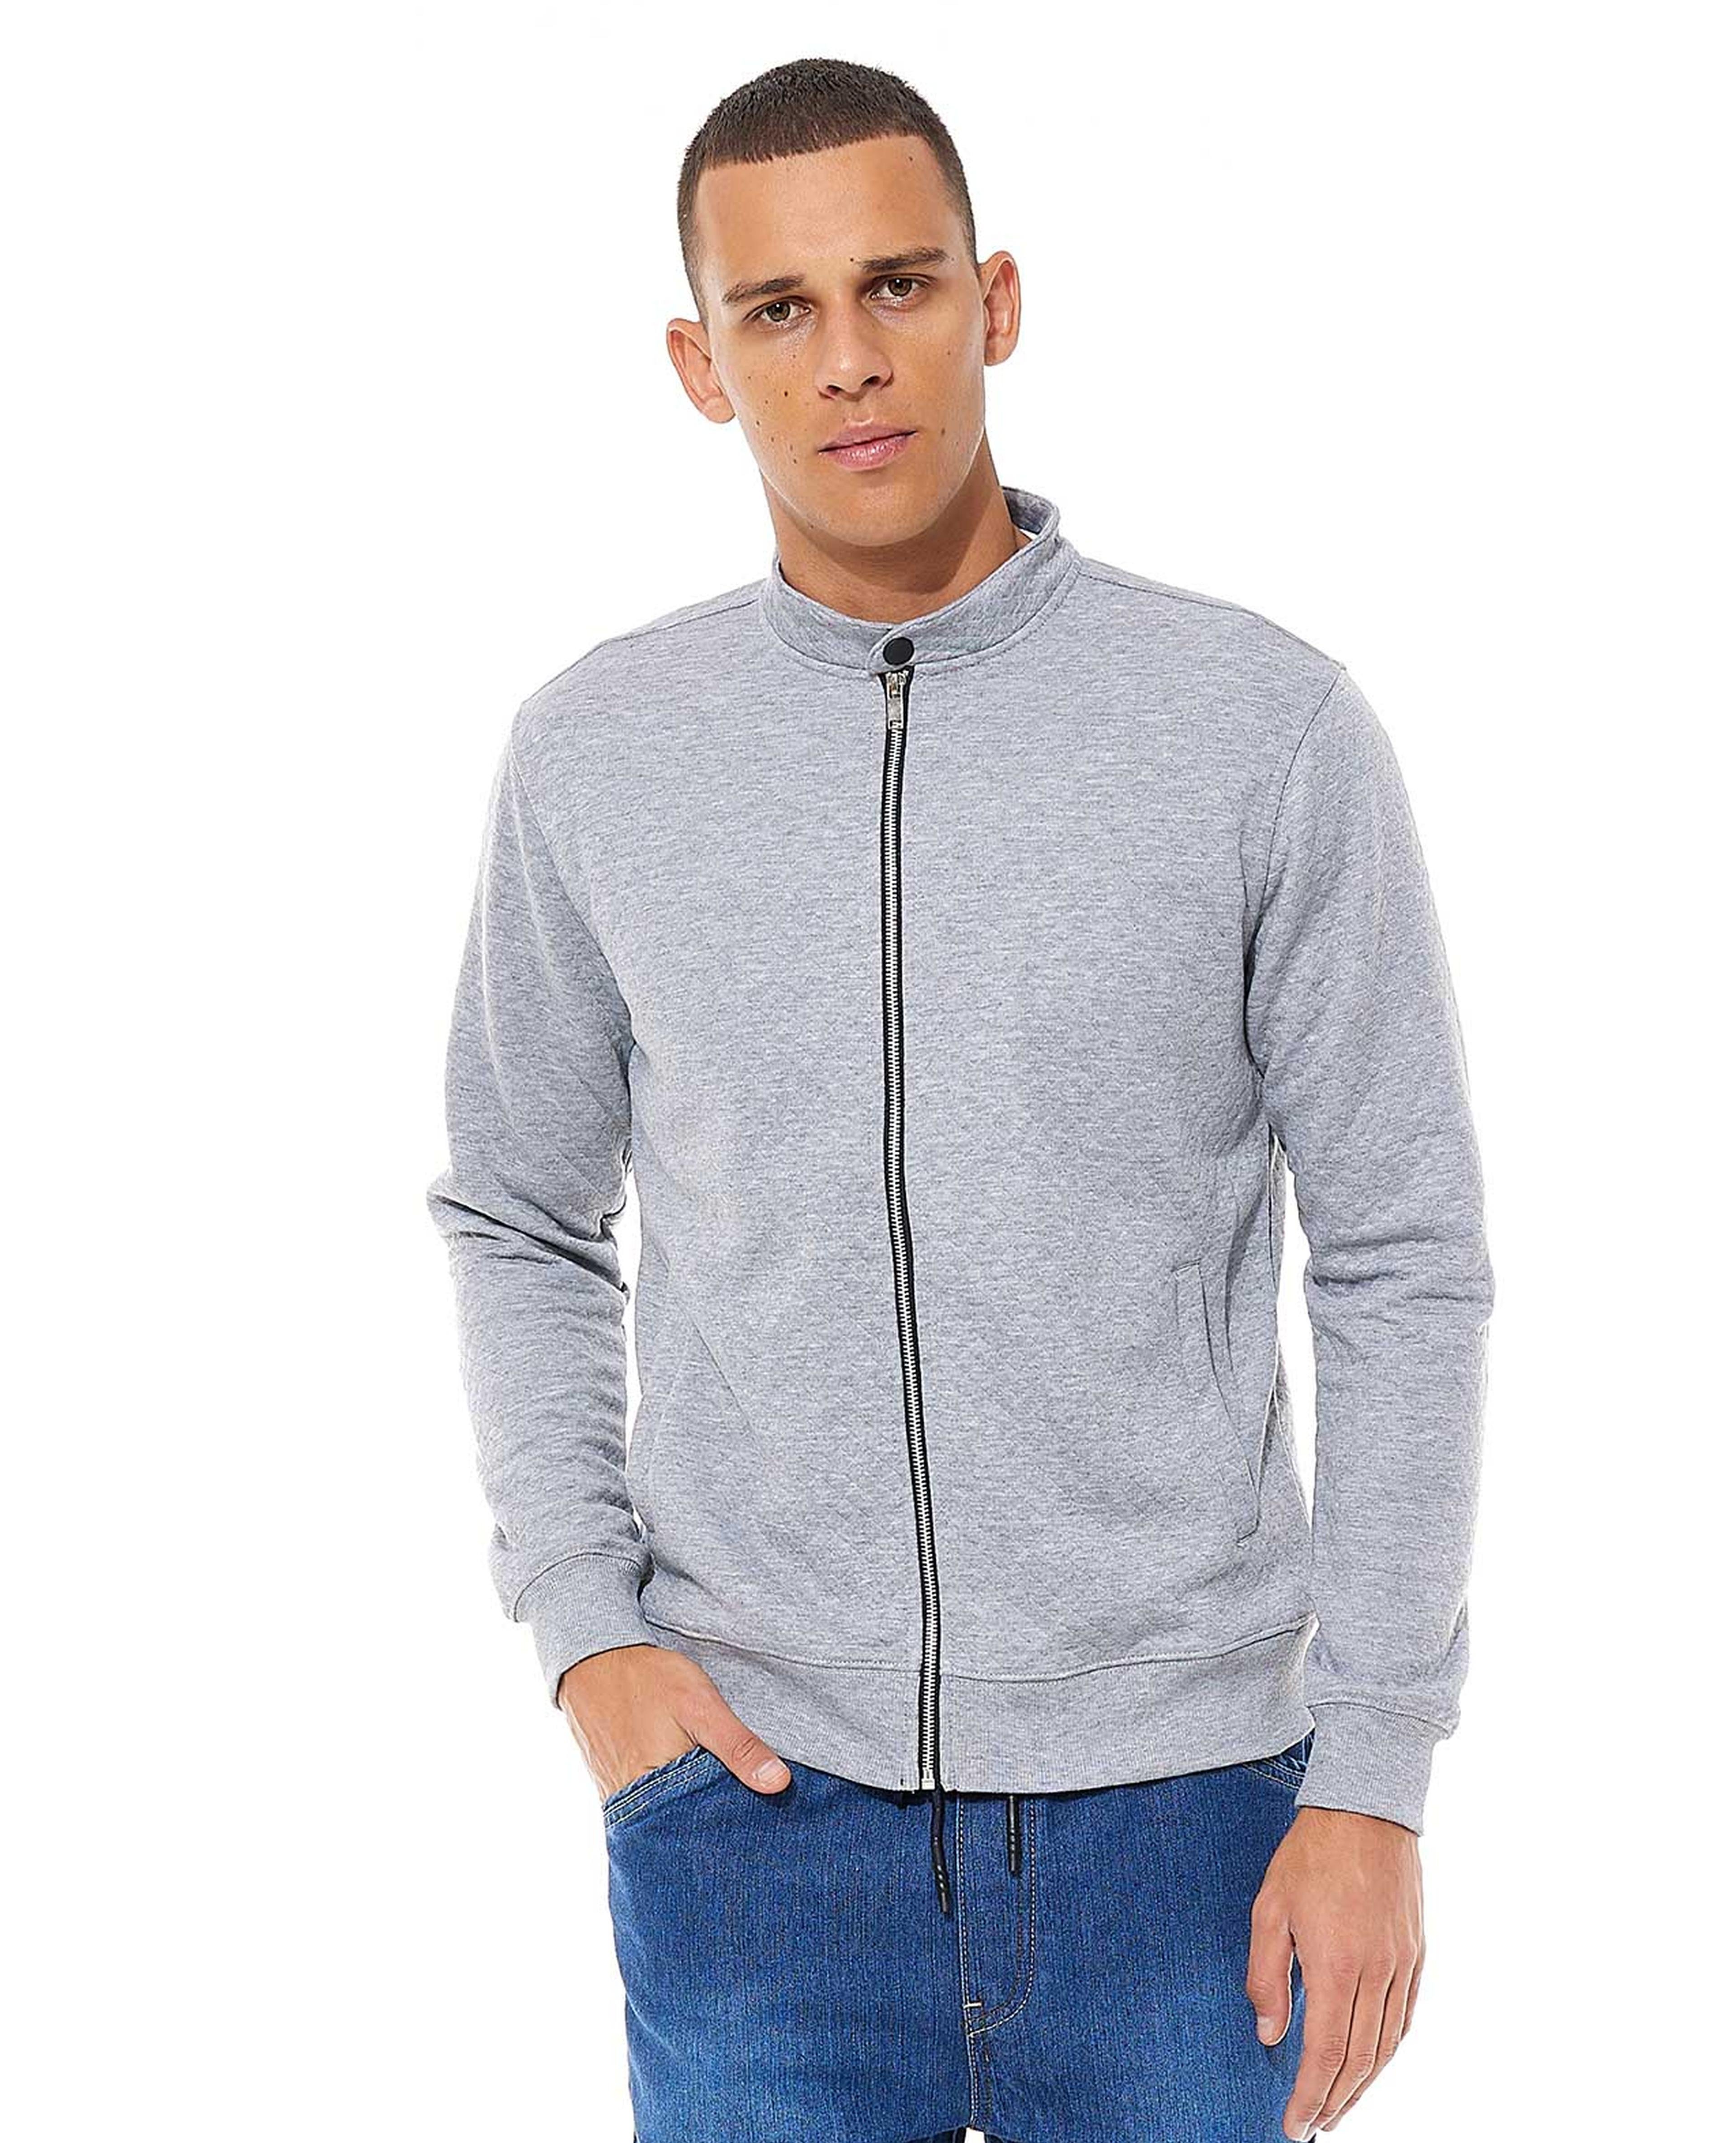 Solid Jacket with High Neck and Zipper Closure